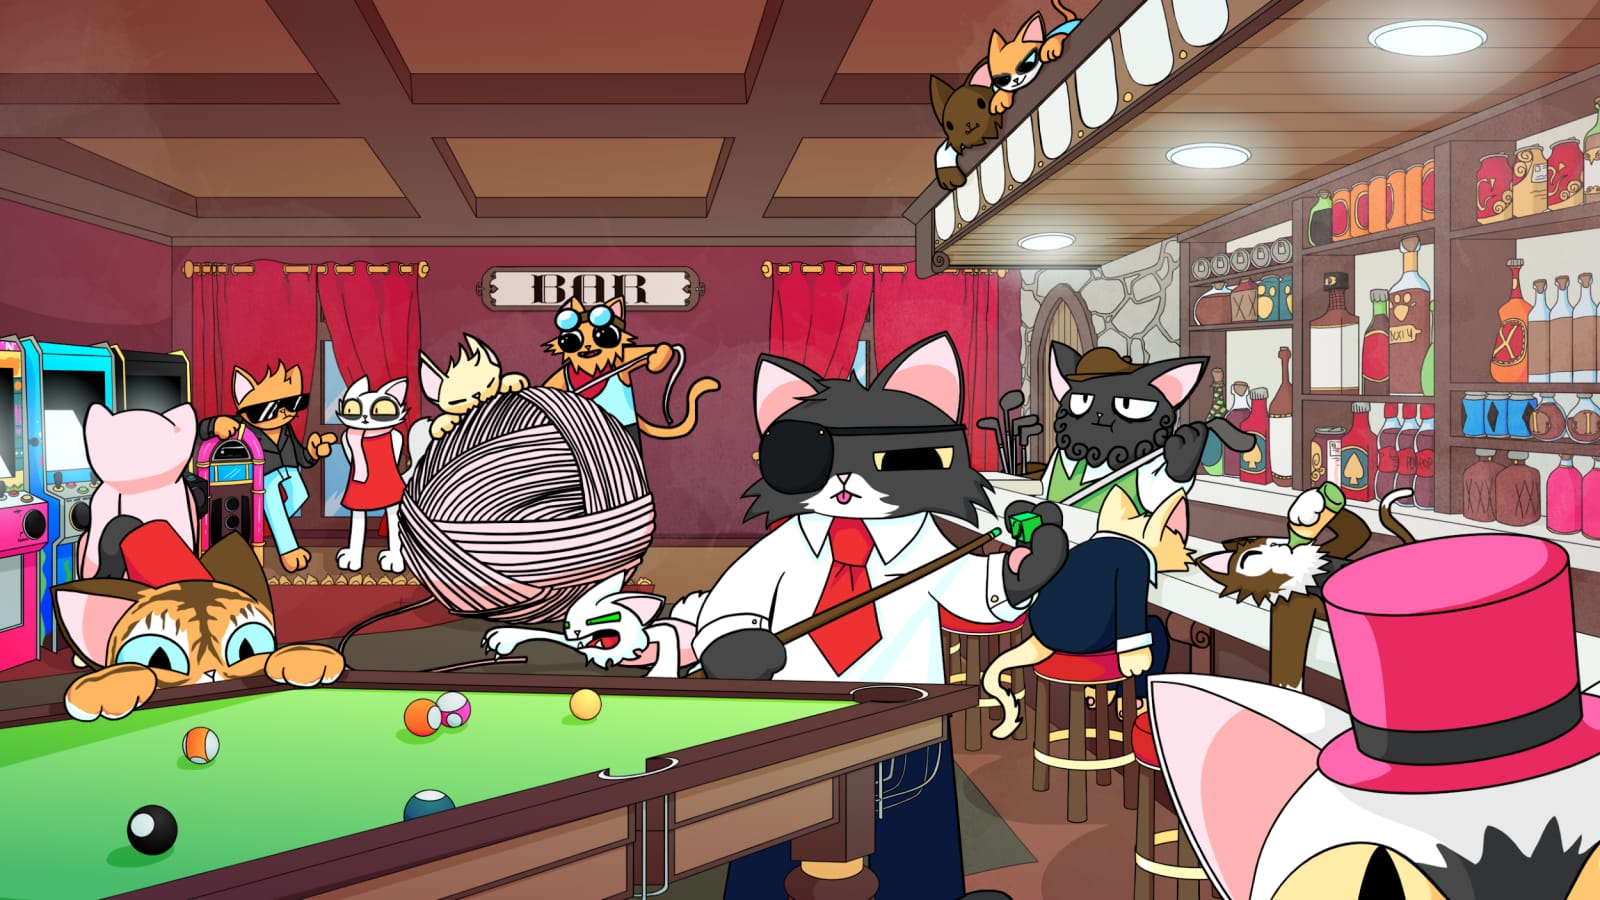 Purrnelopes Country Club